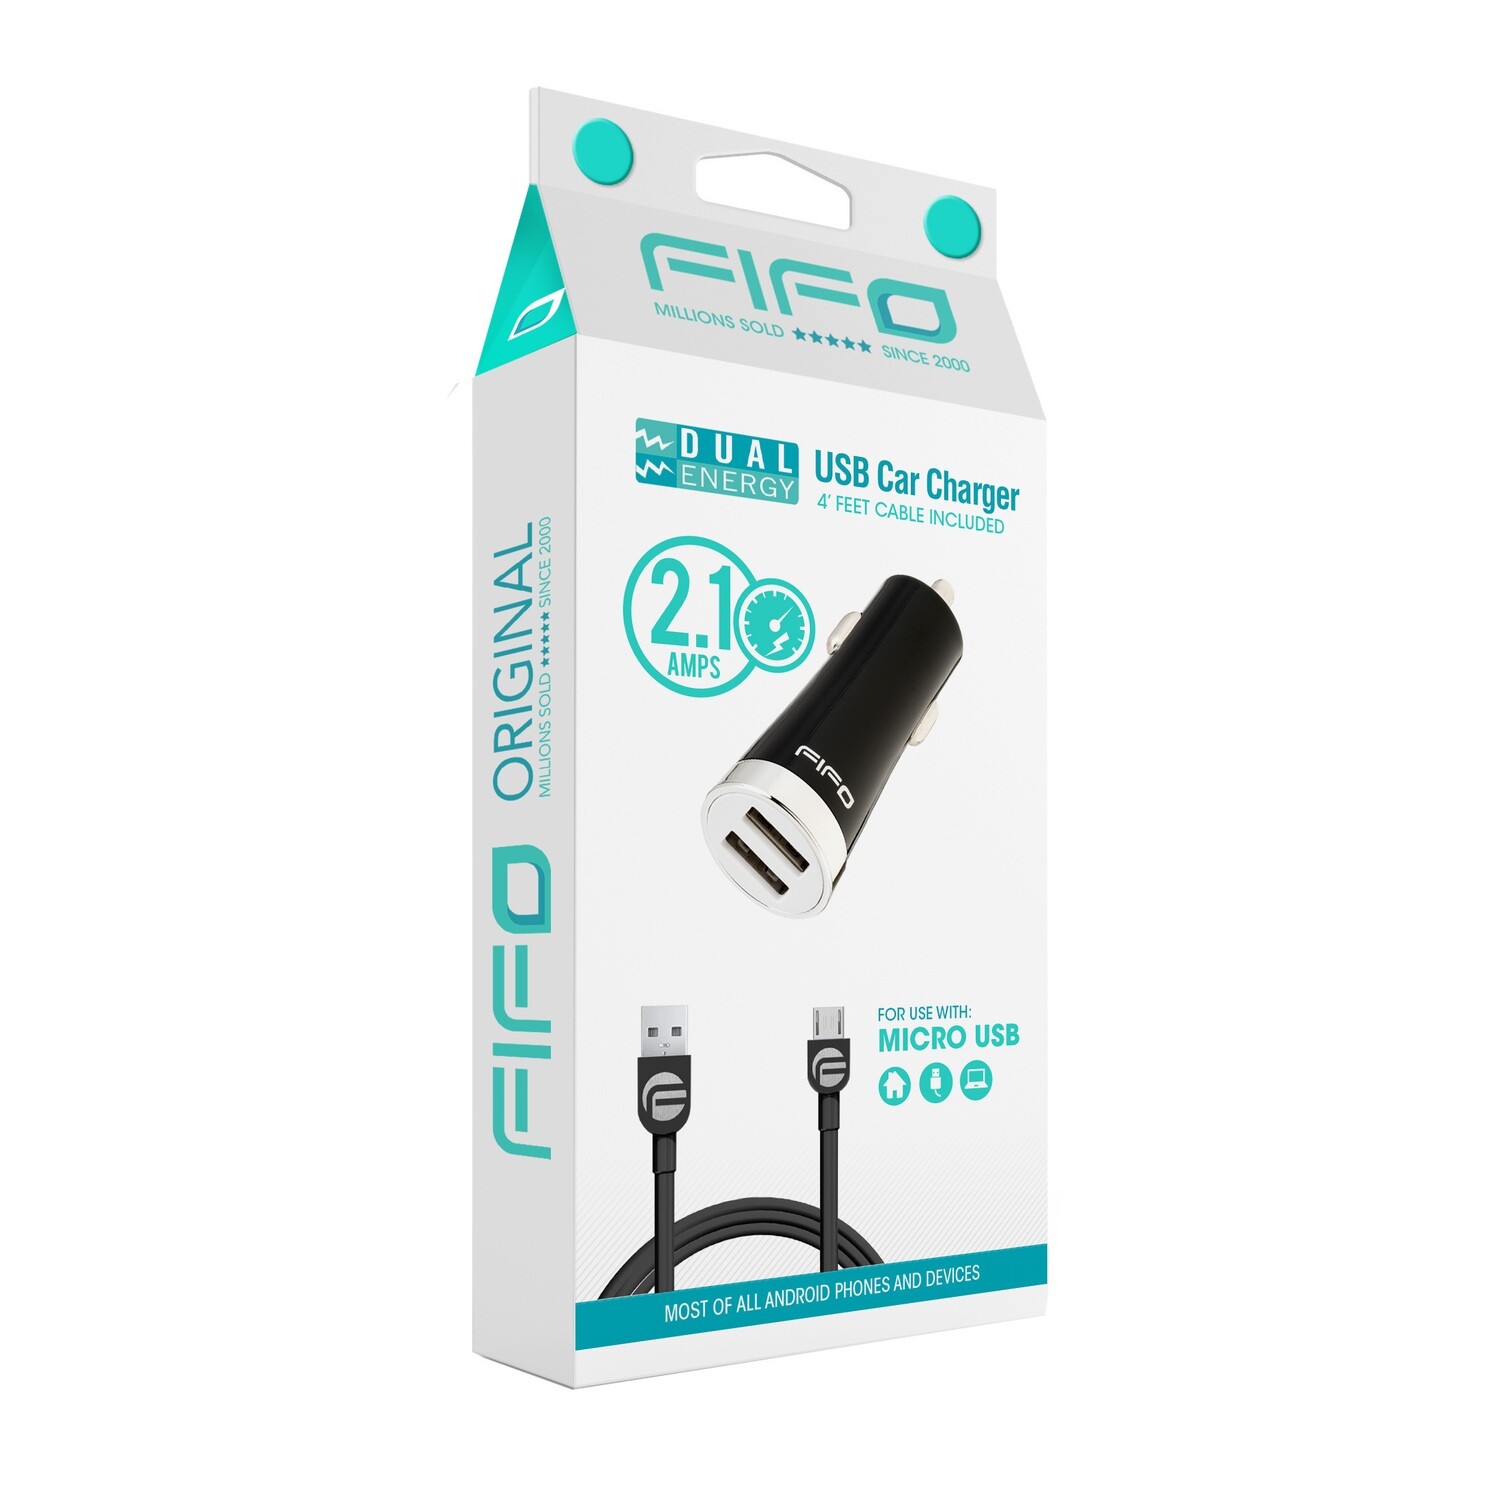 FIFO DUAL USB CAR CHARGERS FOR MICRO USB